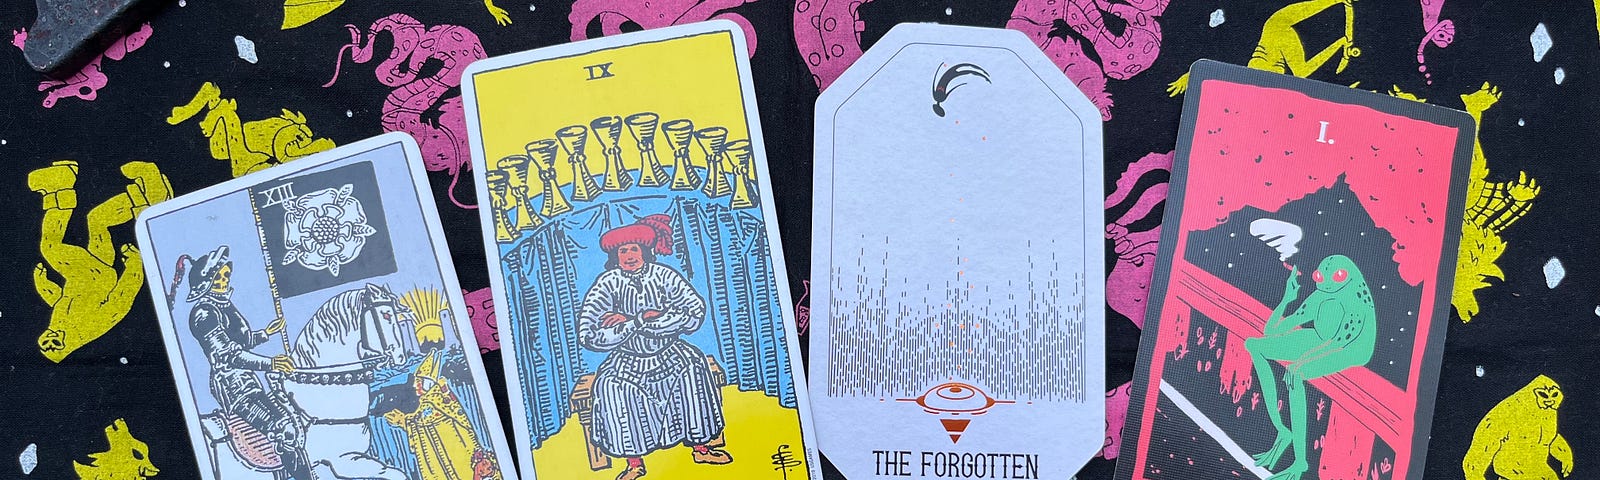 weekly tarot reading for June 17th-23rd, 2024: Death, 9 of Cups, The Forgotten, and Loveland Frogman